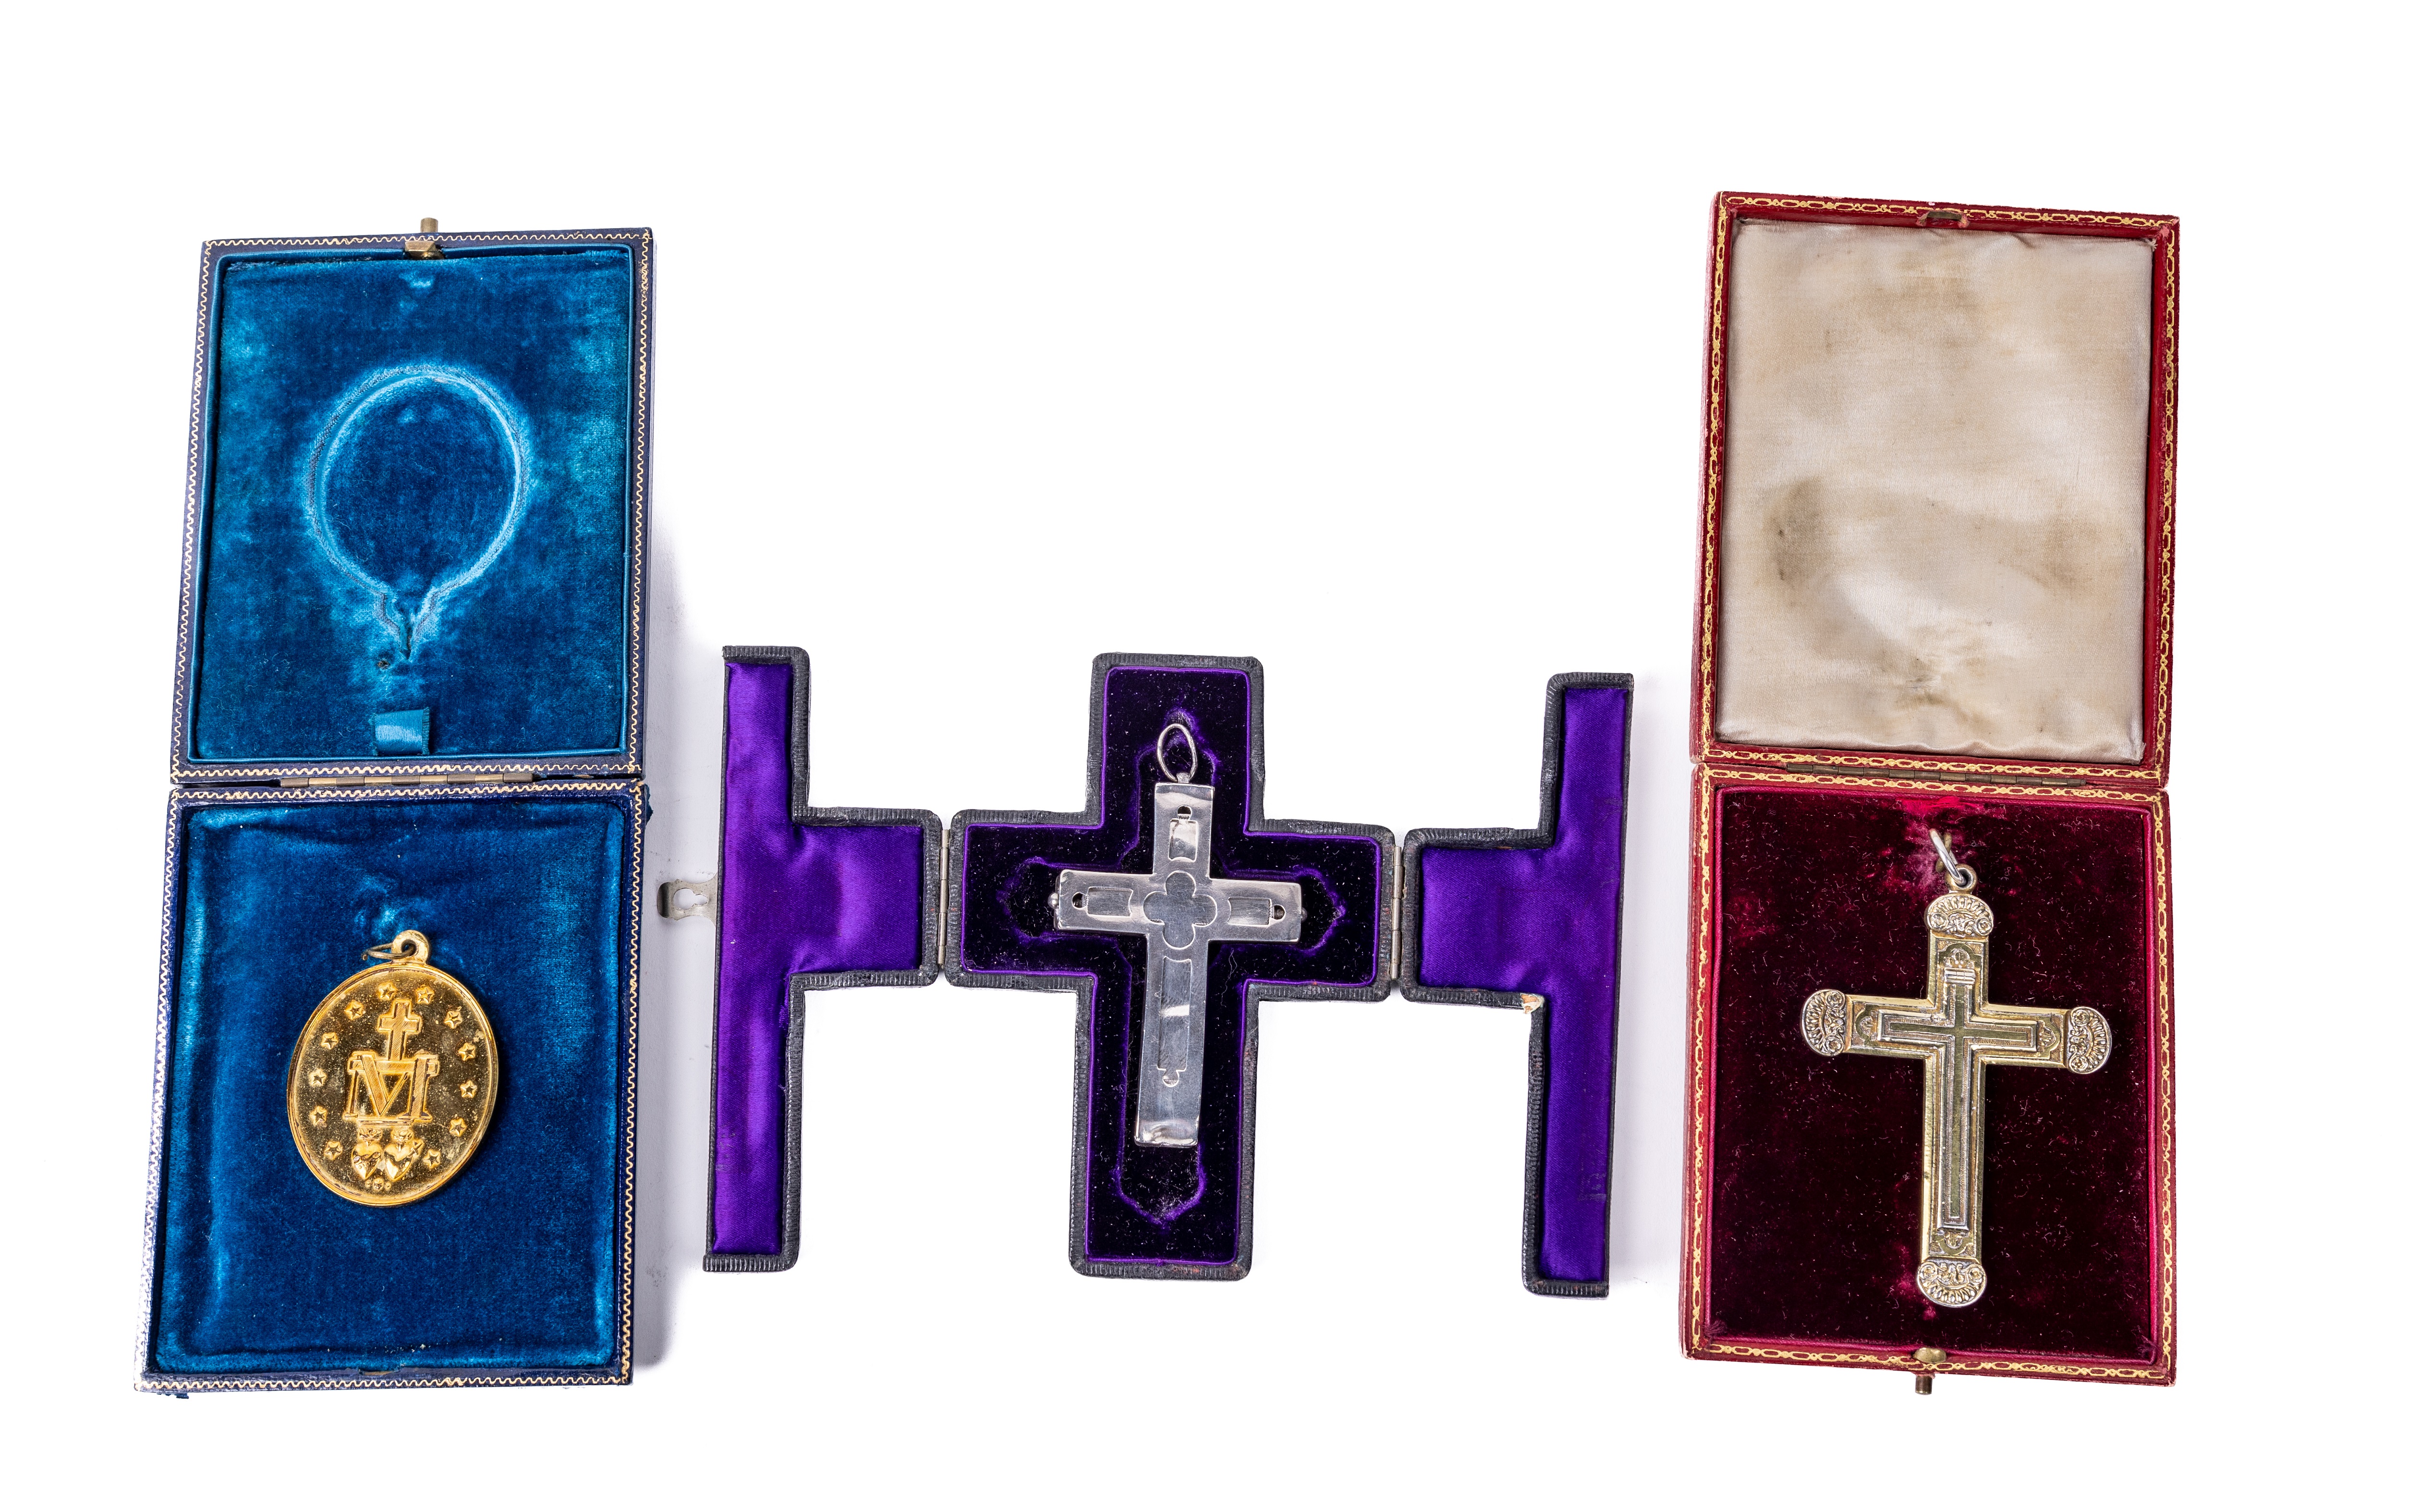 Co. Waterford: A cased Relic of the True Cross - a morocco and tooled gilt case inscribed [